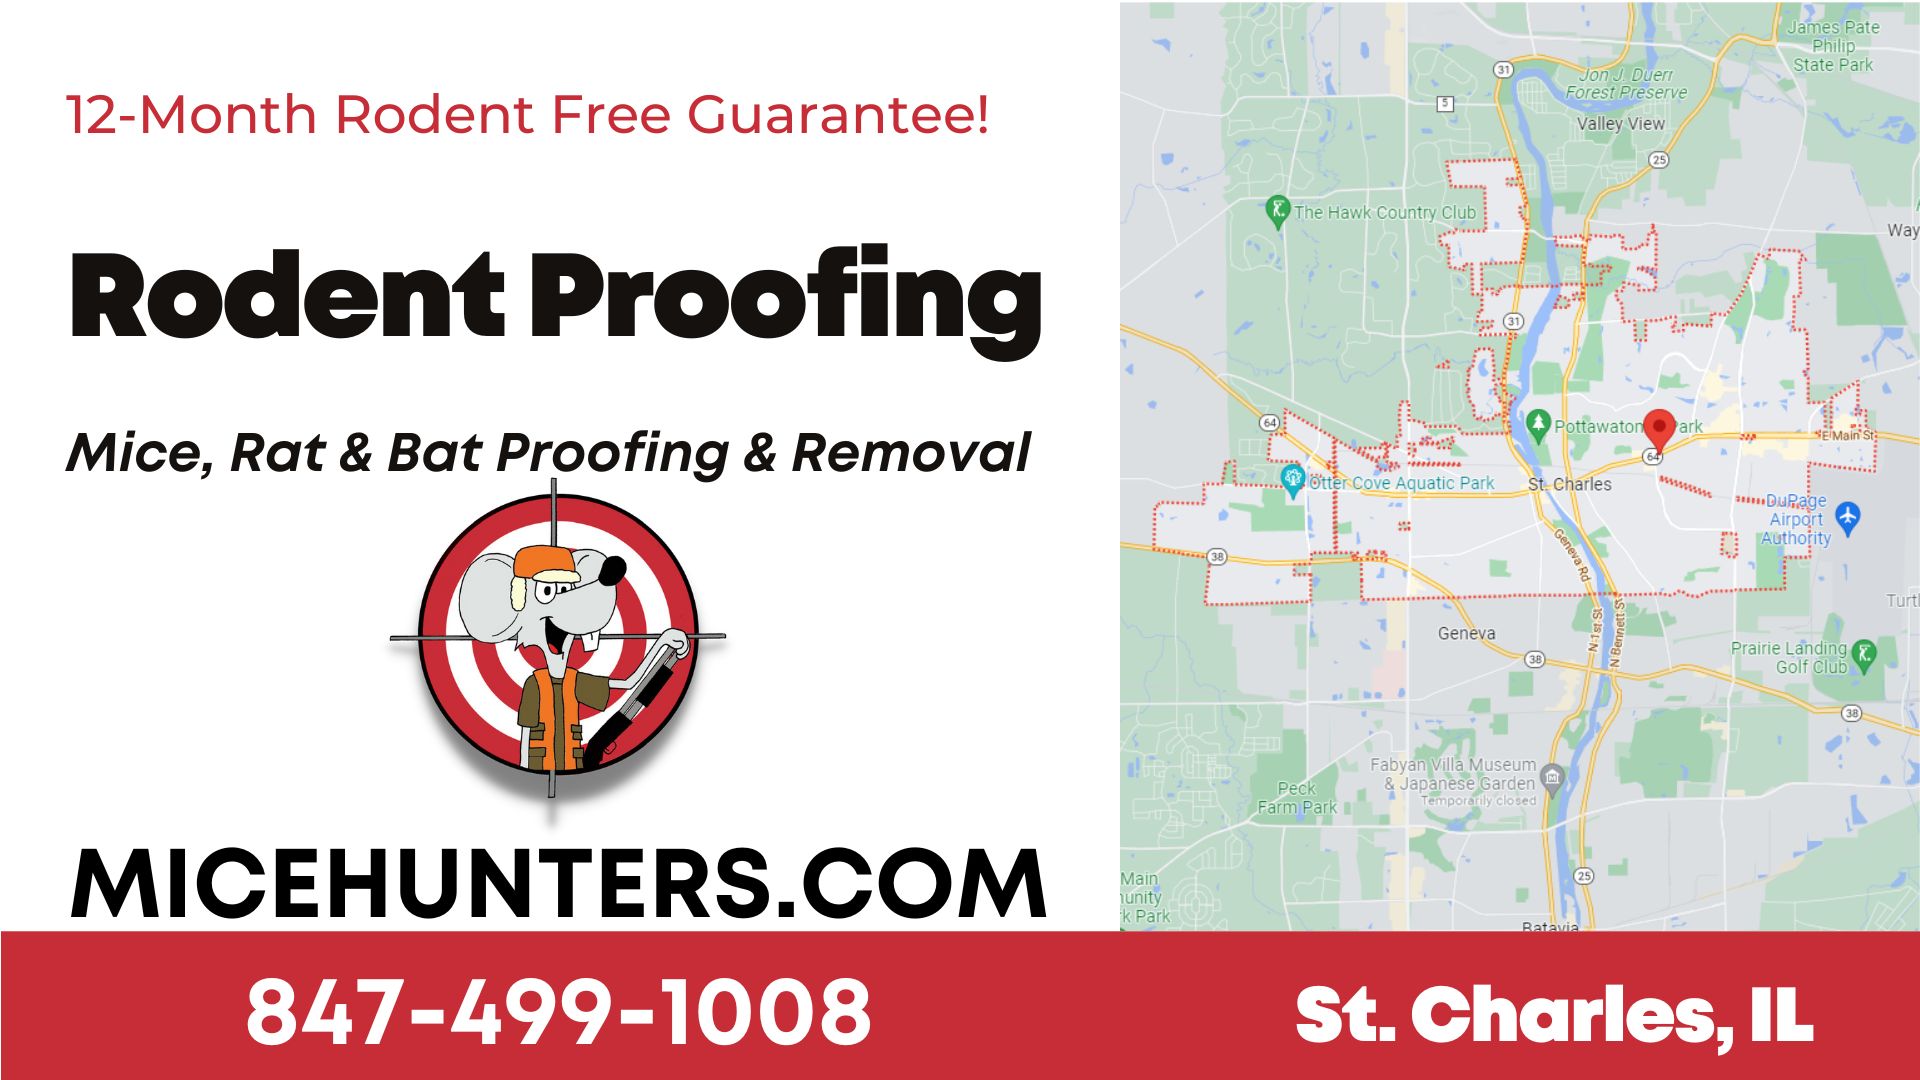 St. Charles Mice - Bat - Rat Removal Proofing Service